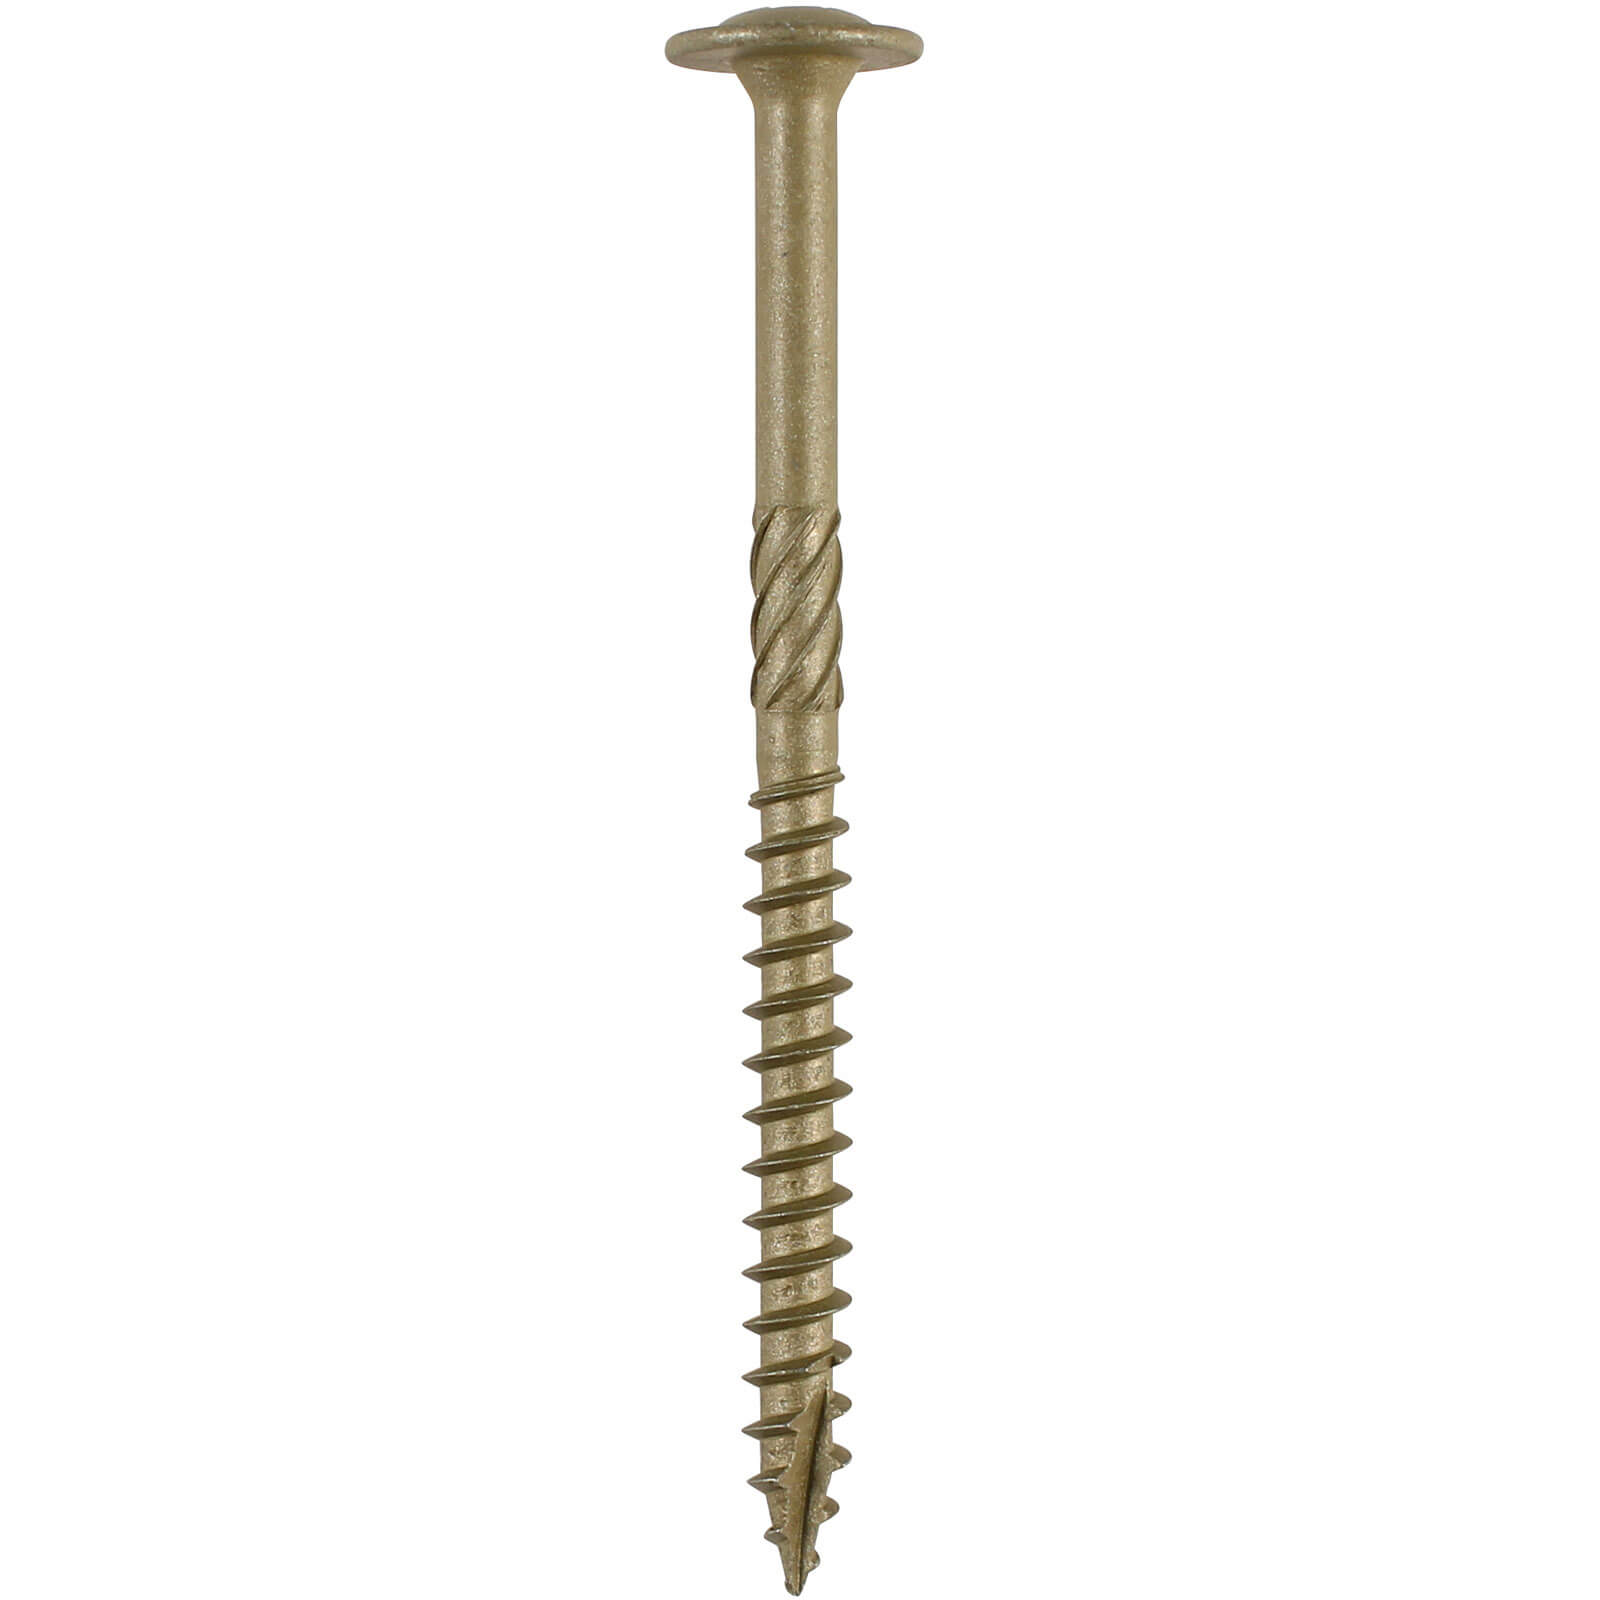 Photos - Nail / Screw / Fastener TIMCO Wafer Torx Head Index Wood Screws 8mm 275mm Pack of 25 275INW 